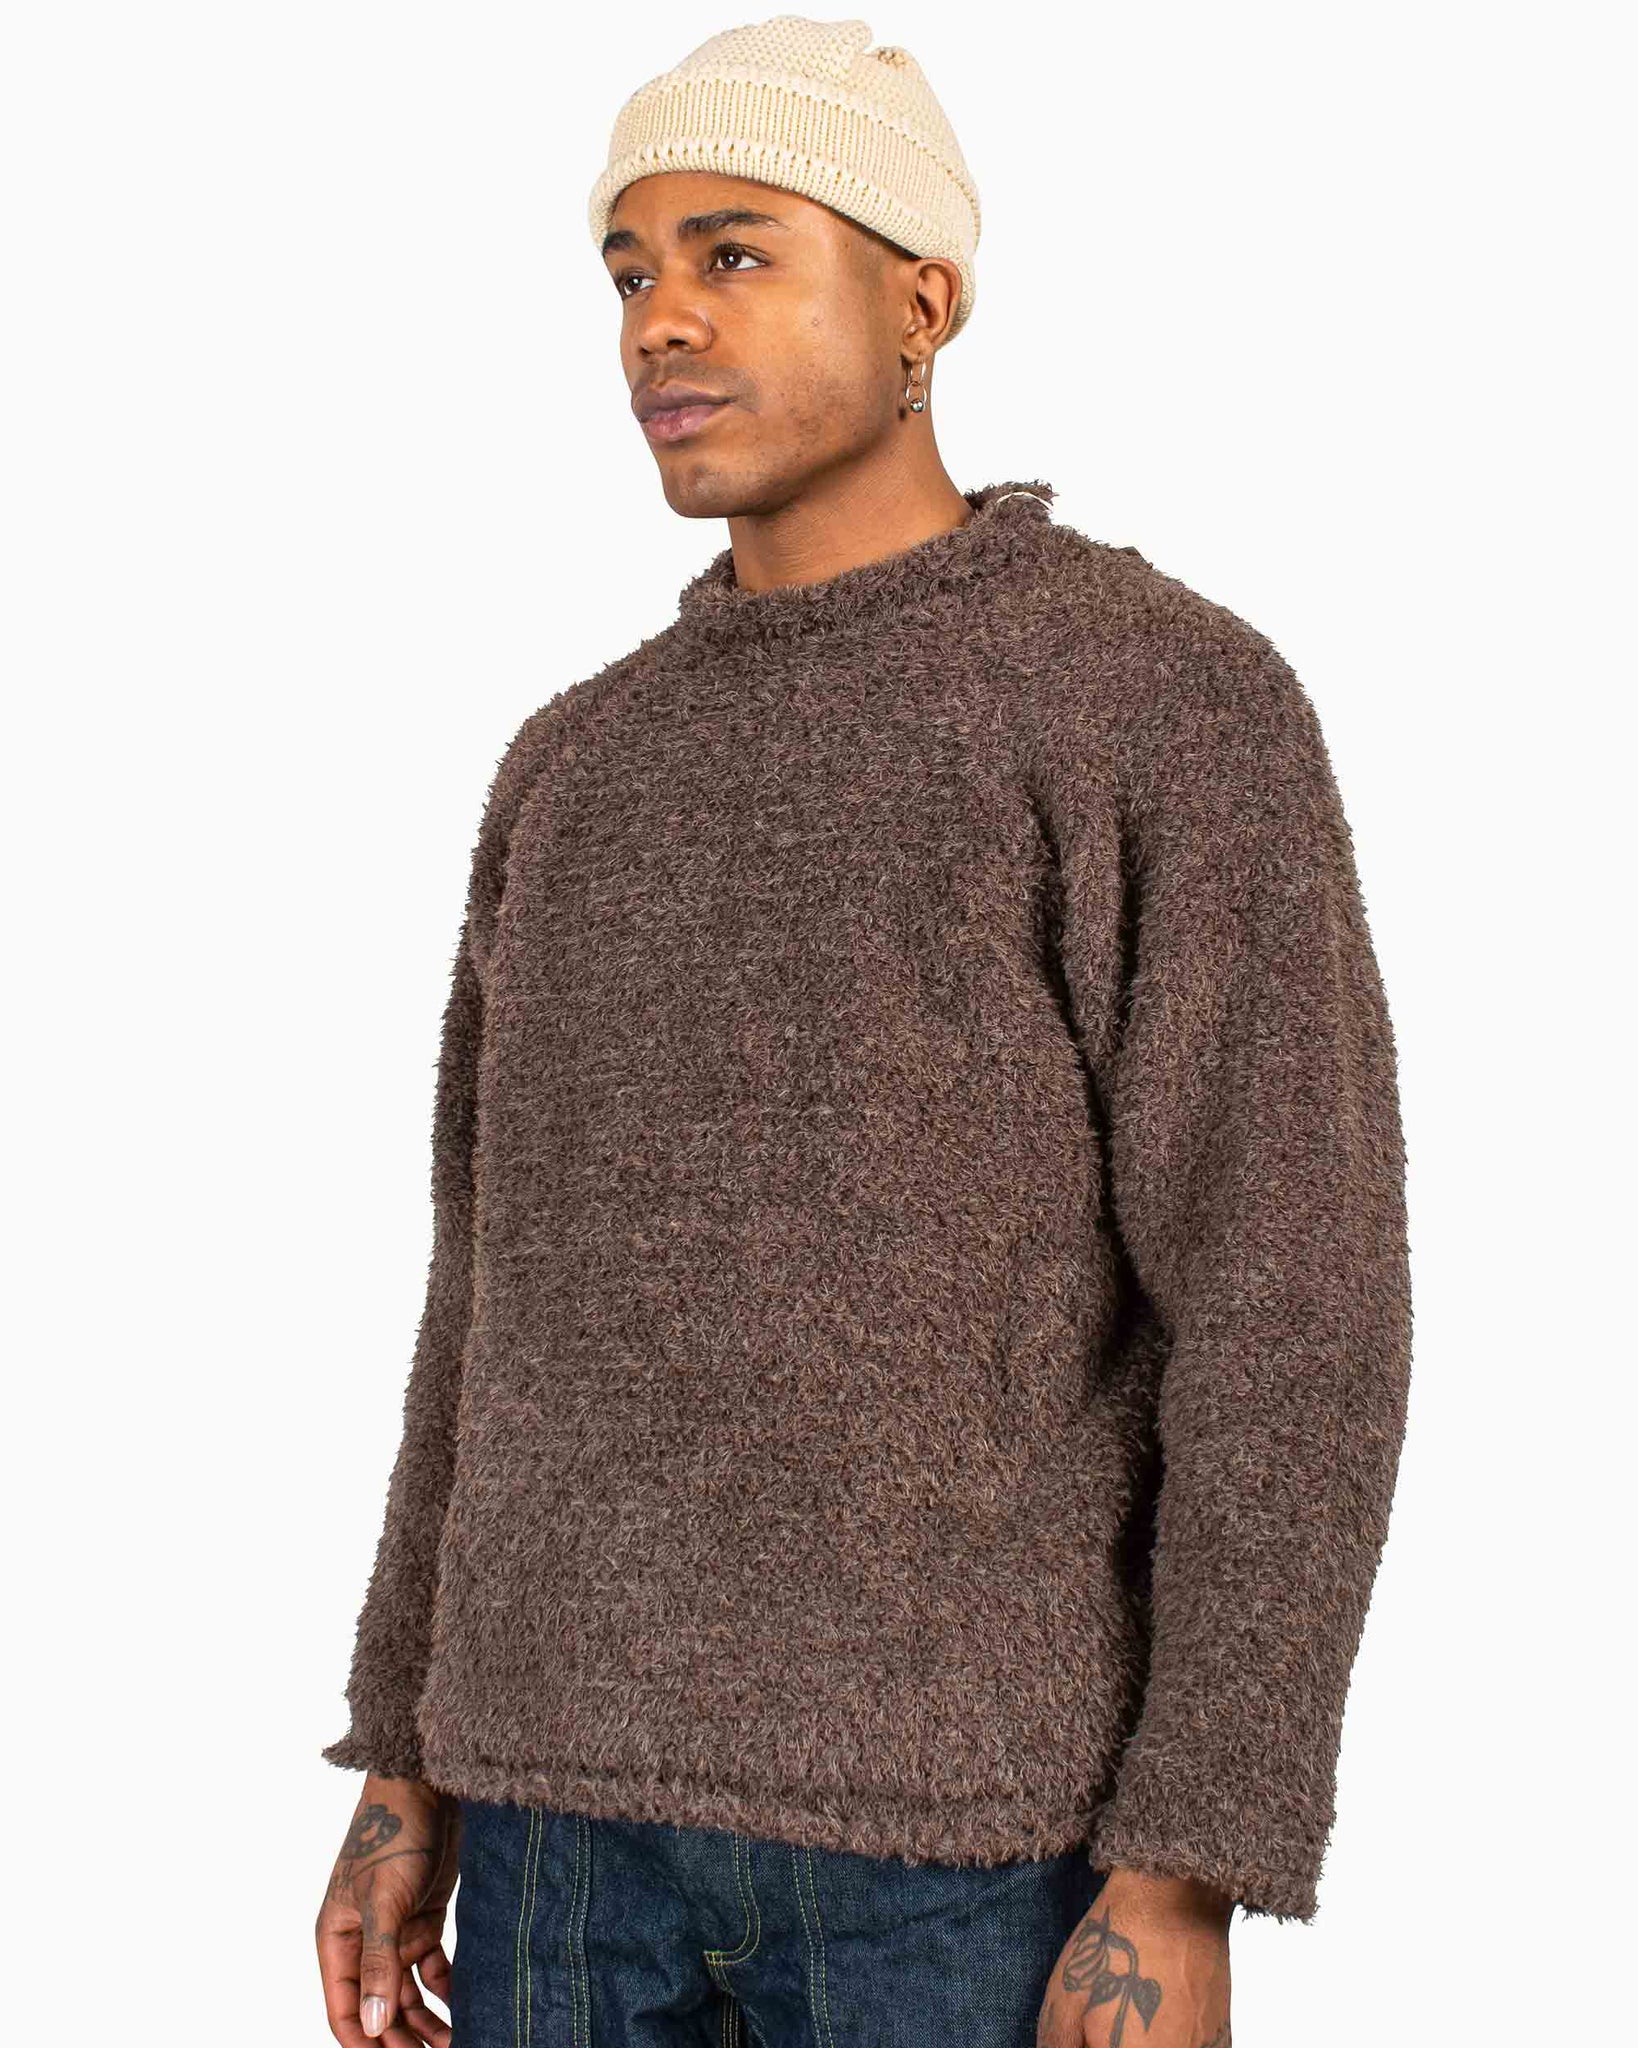 The Real McCoy's MC22123 Mockneck Mole Sweater Brown Close